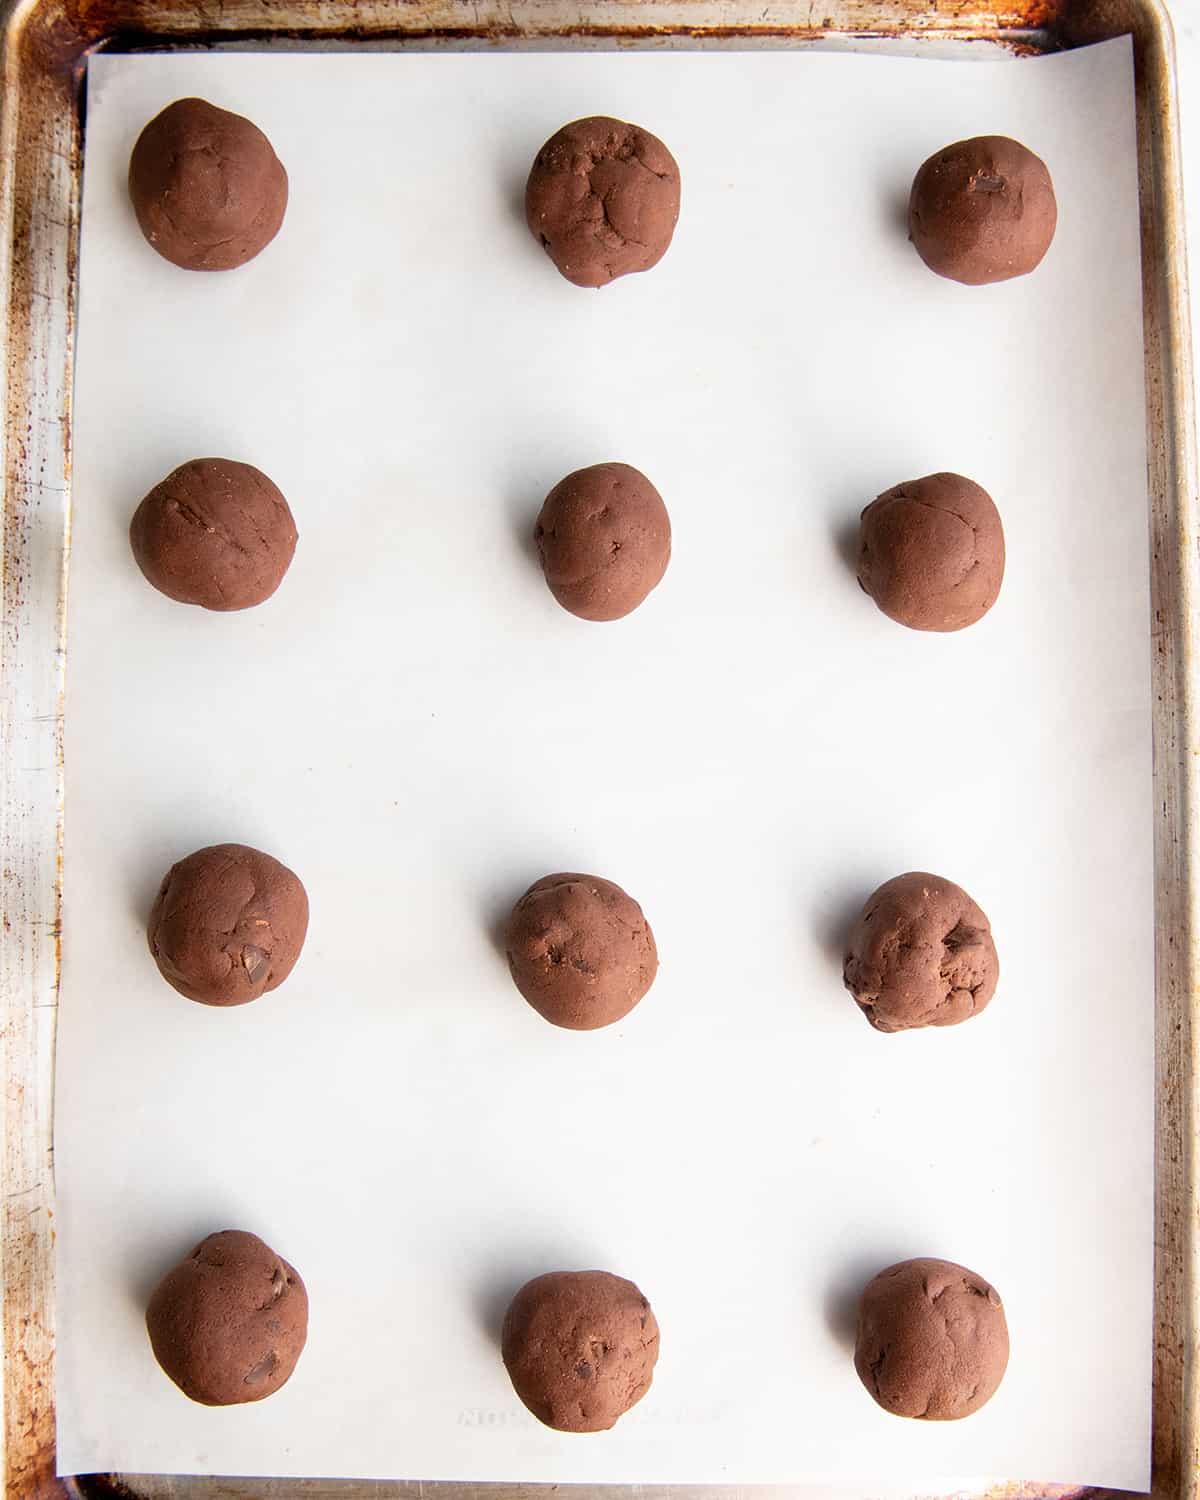 12 brownie cookie dough balls on a baking sheet before baking